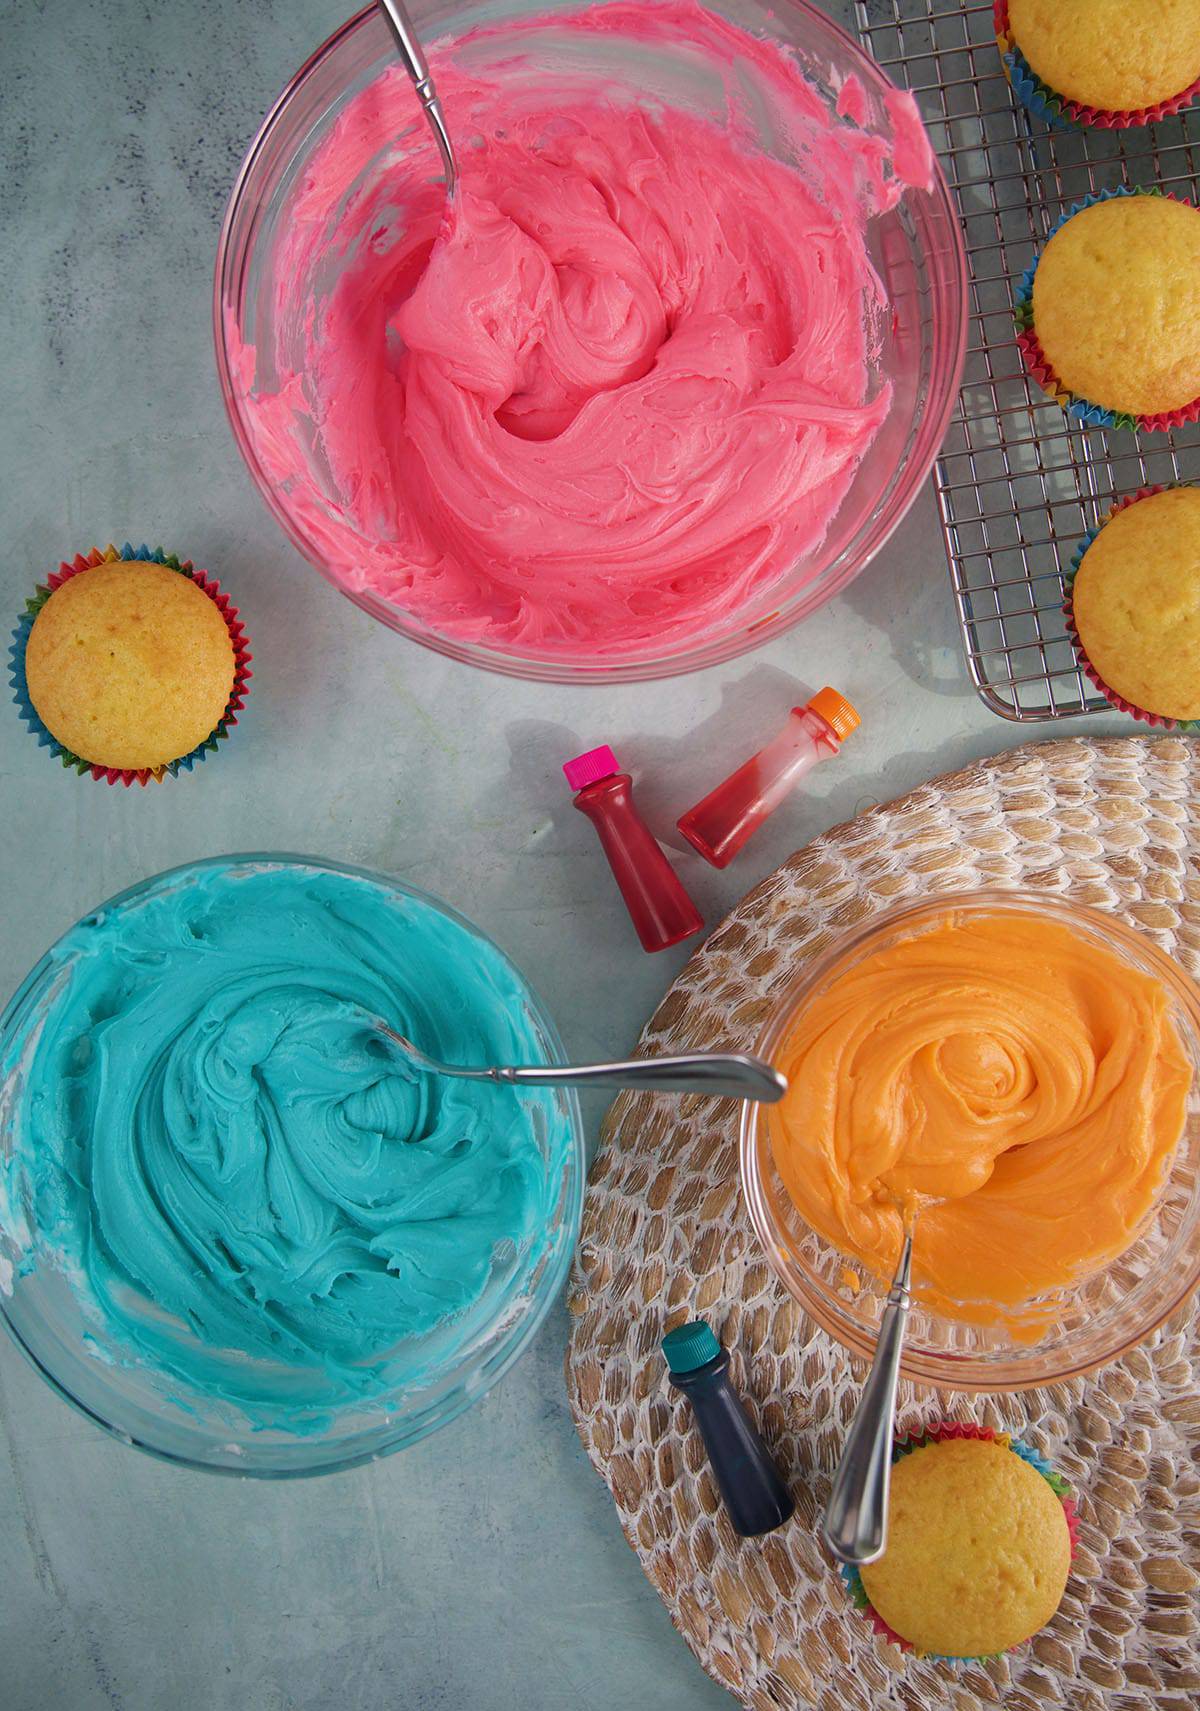 Three bowls contain blue, pink, and orange frosting.